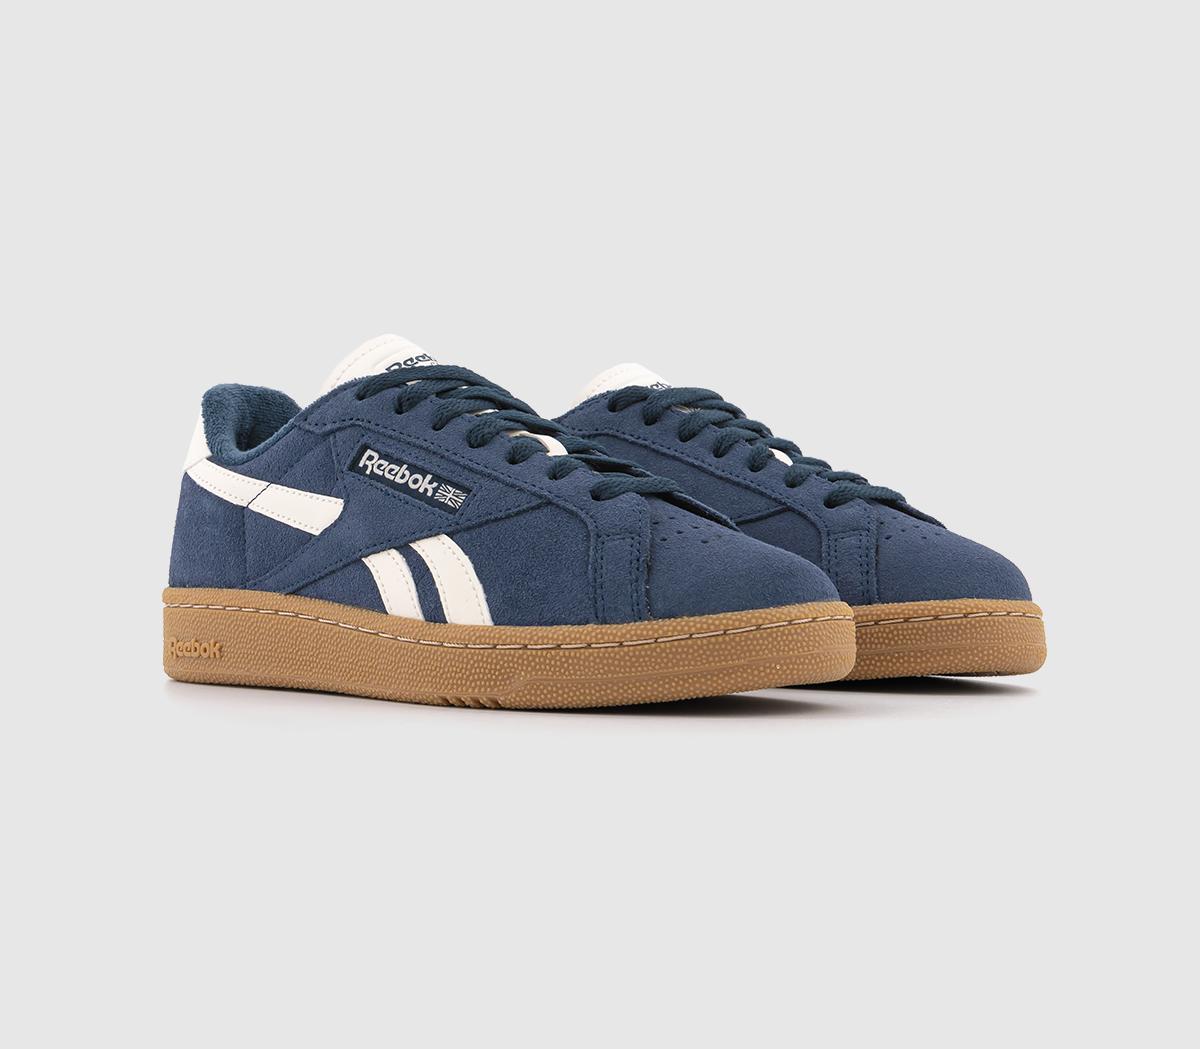 Reebok Womens Club C Grounds Trainers Vector Navy Blue, 7.5